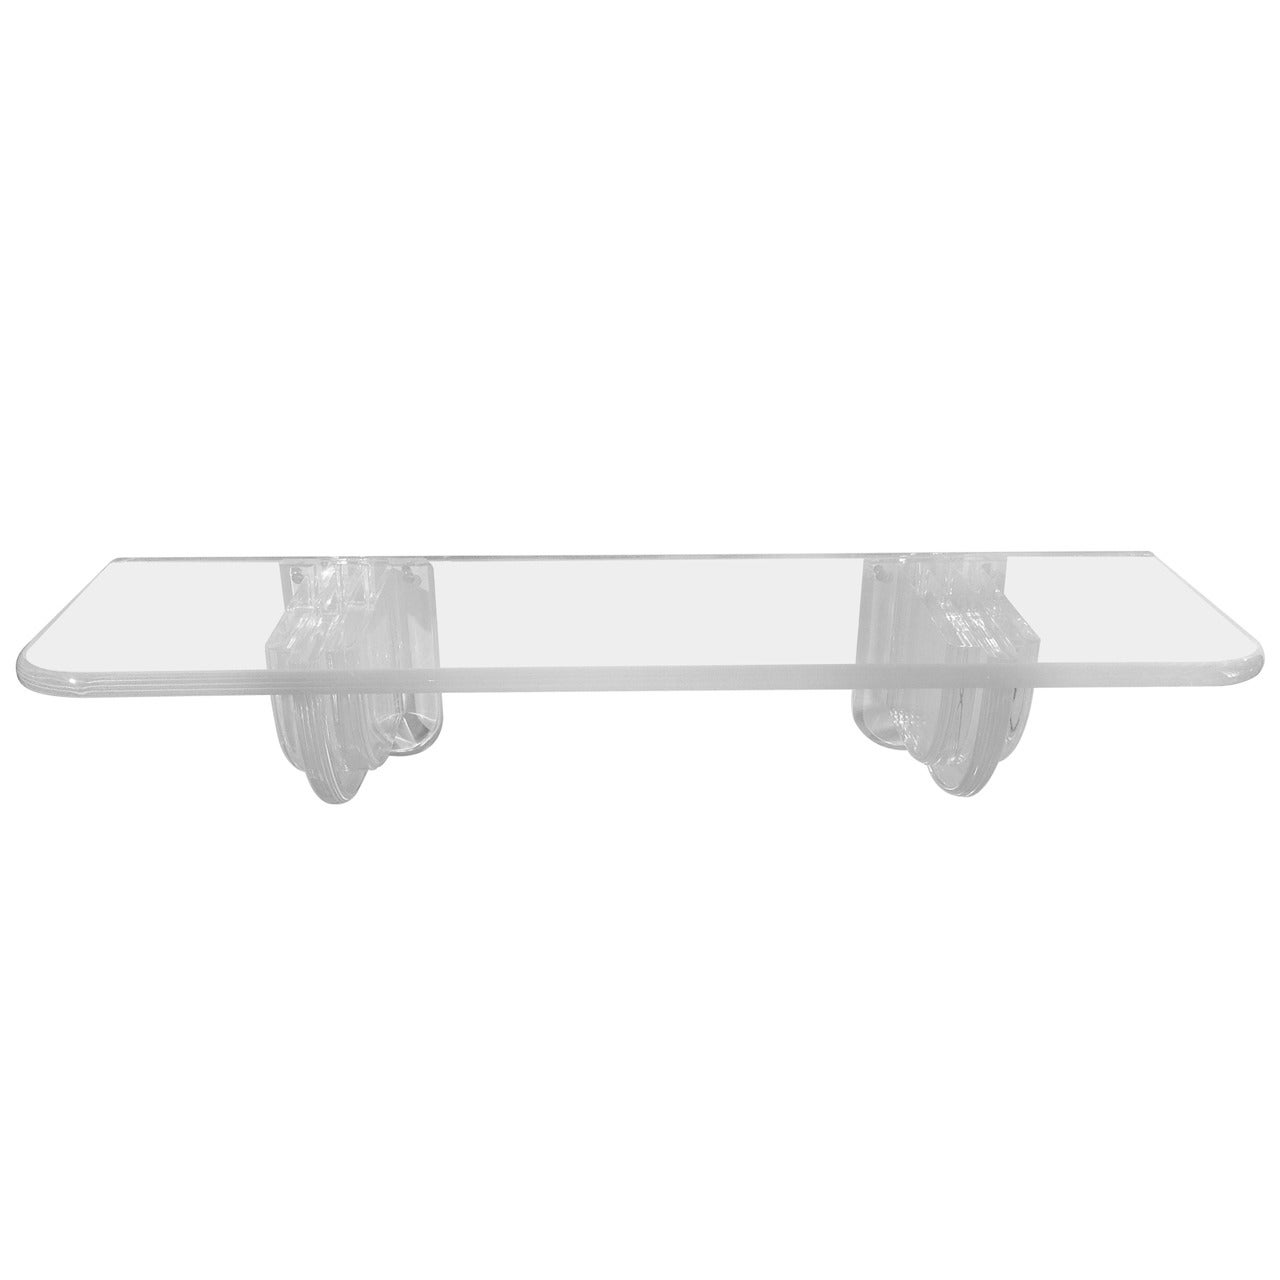 Stunning 1970s Acrylic Shelf from a Palm Springs Estate done by Steve Chase